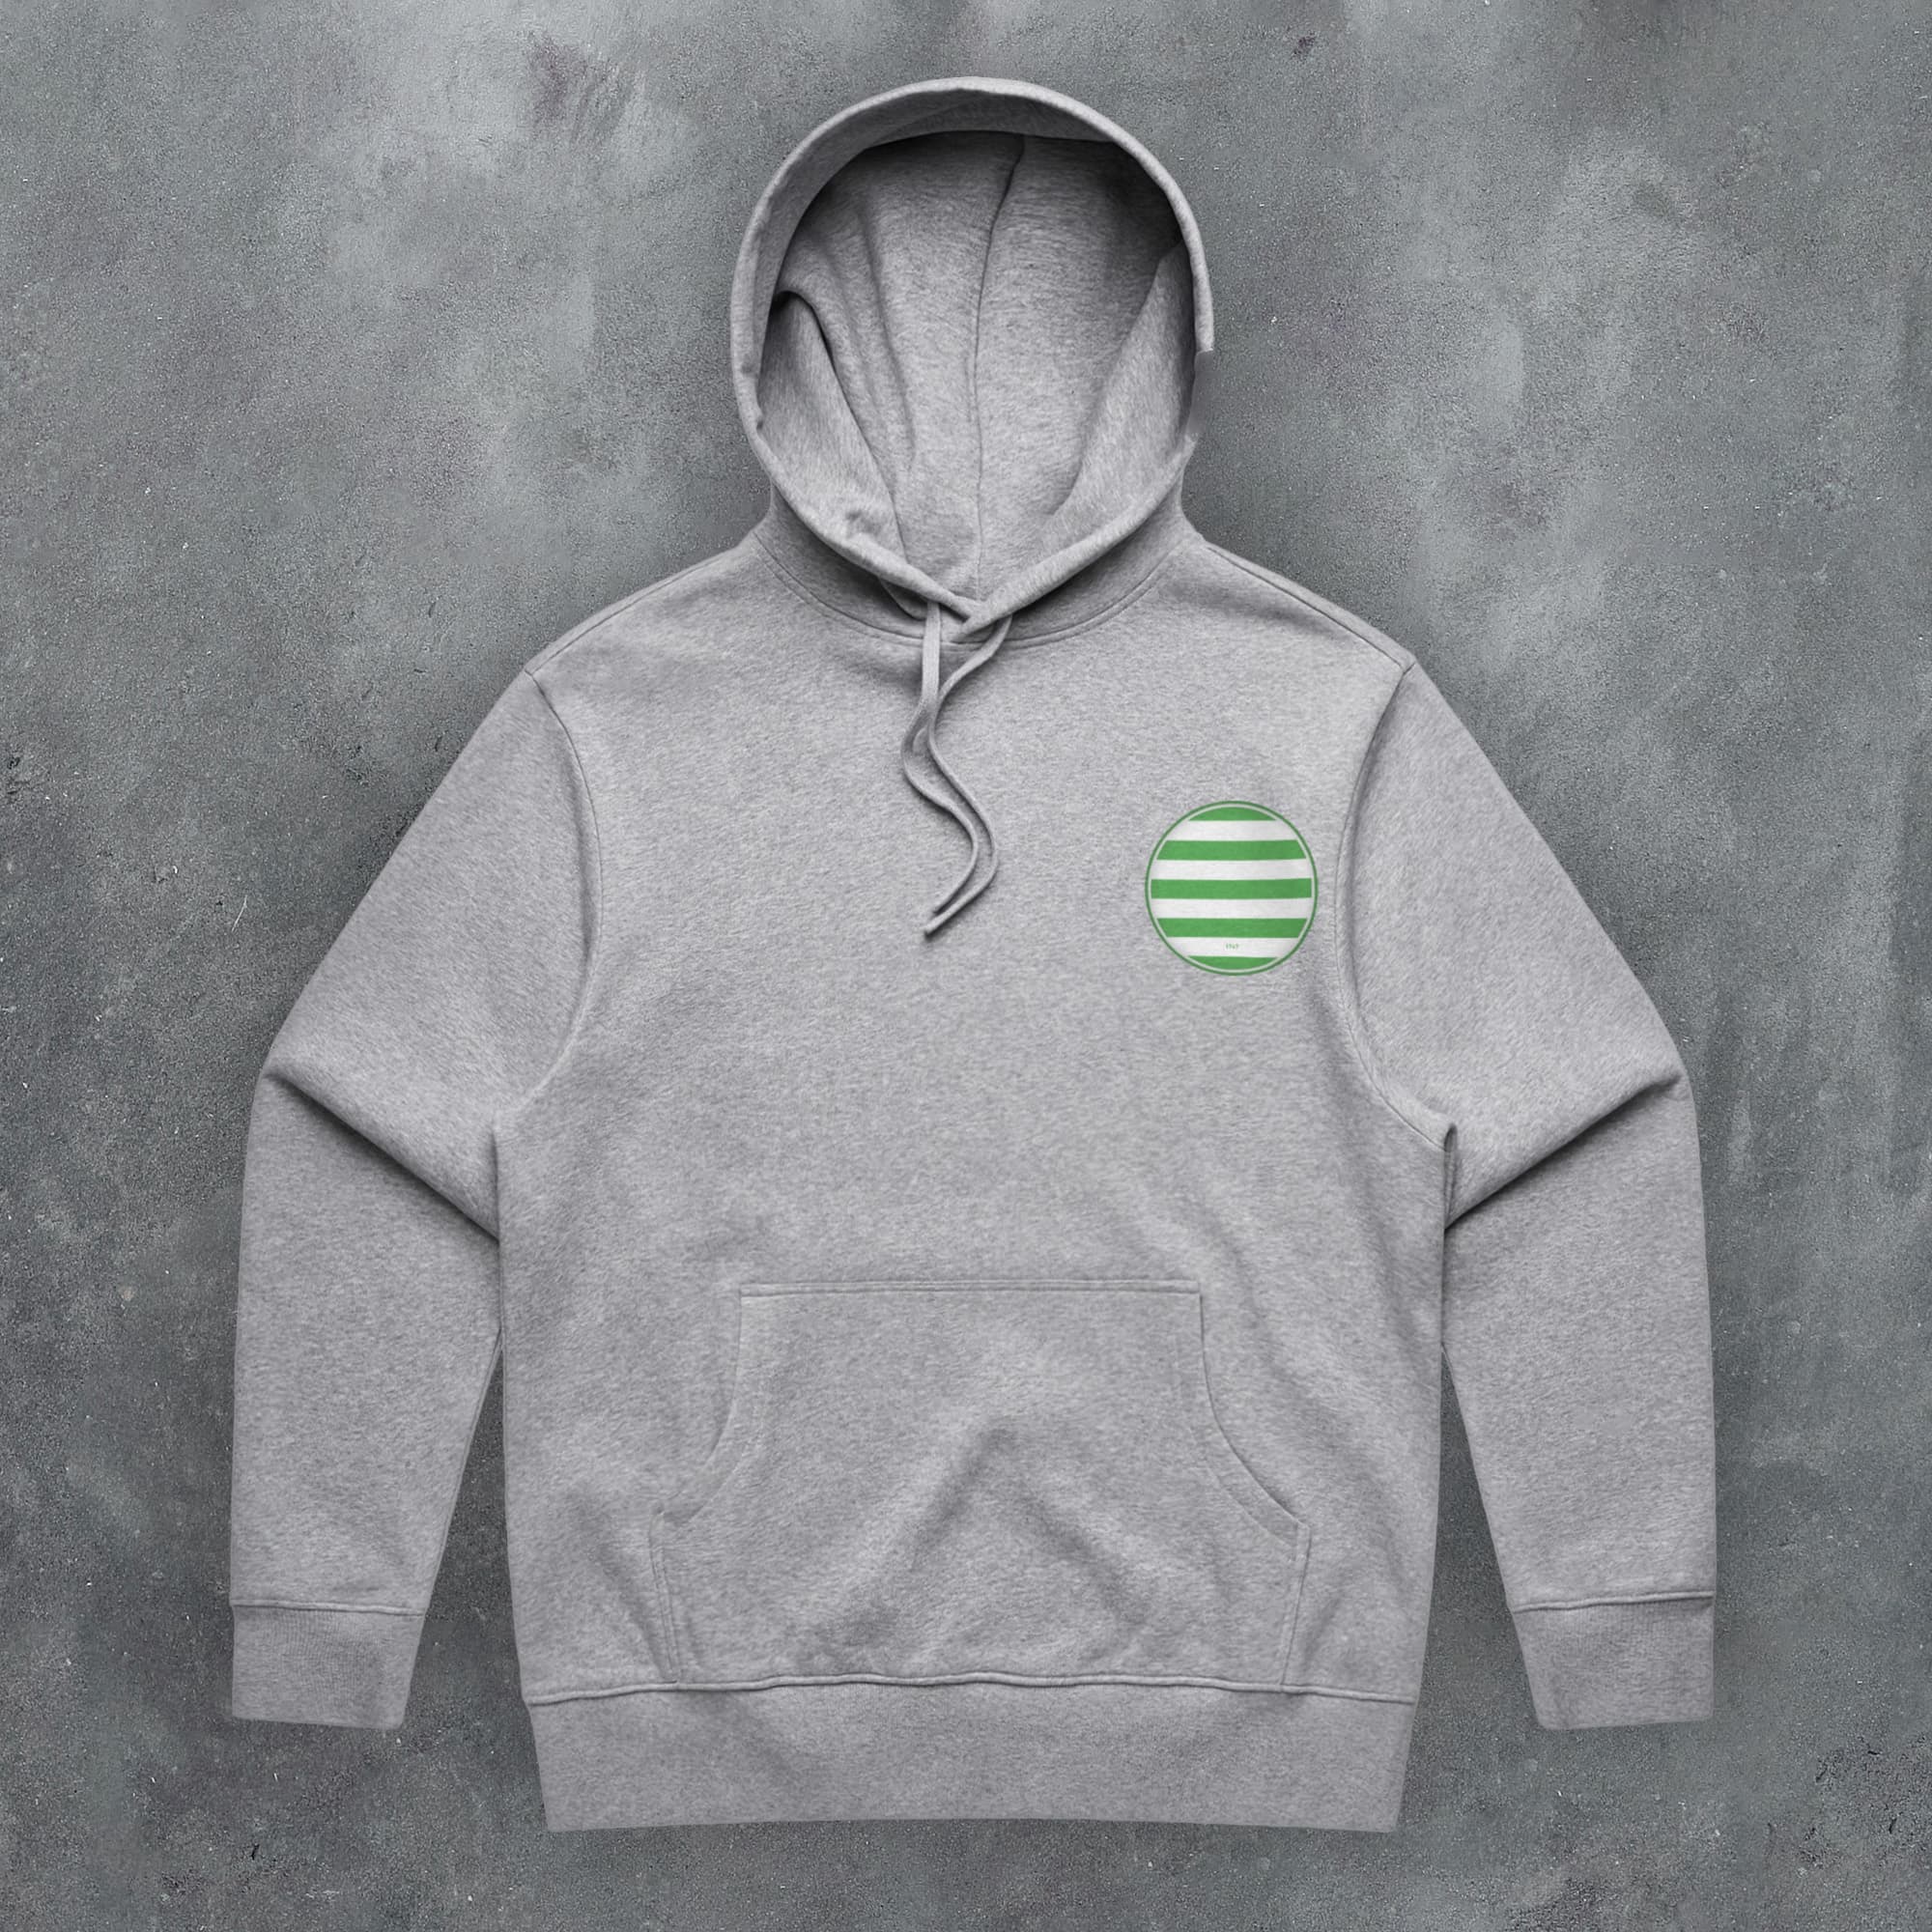 a grey hoodie with a green stripe on the chest